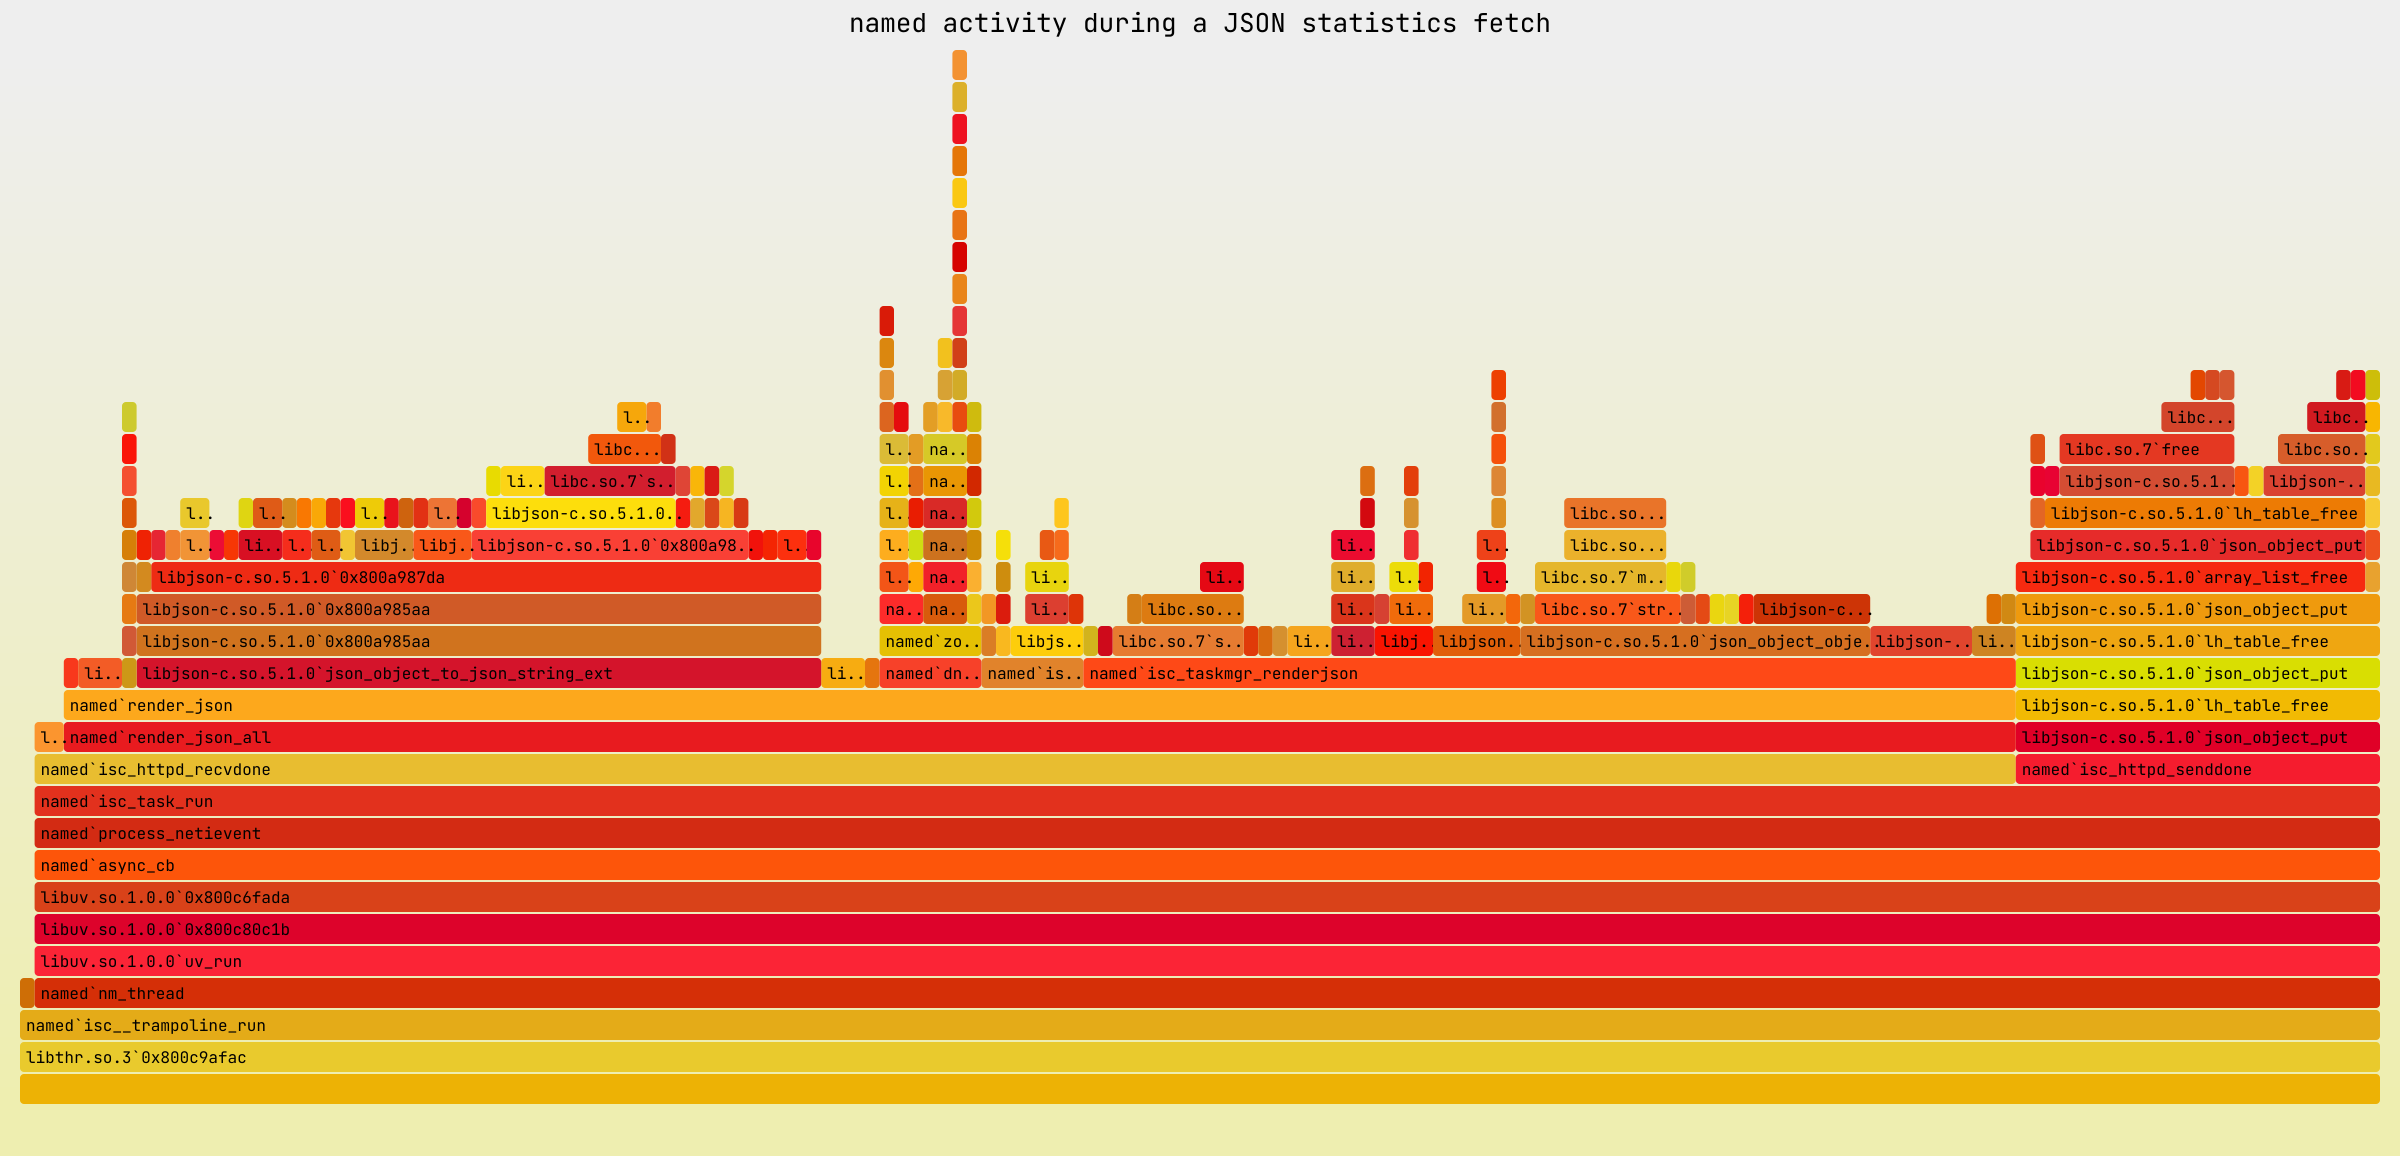 Chart titled 'named activity during a JSON statistics fetch,' with one unusually high spike